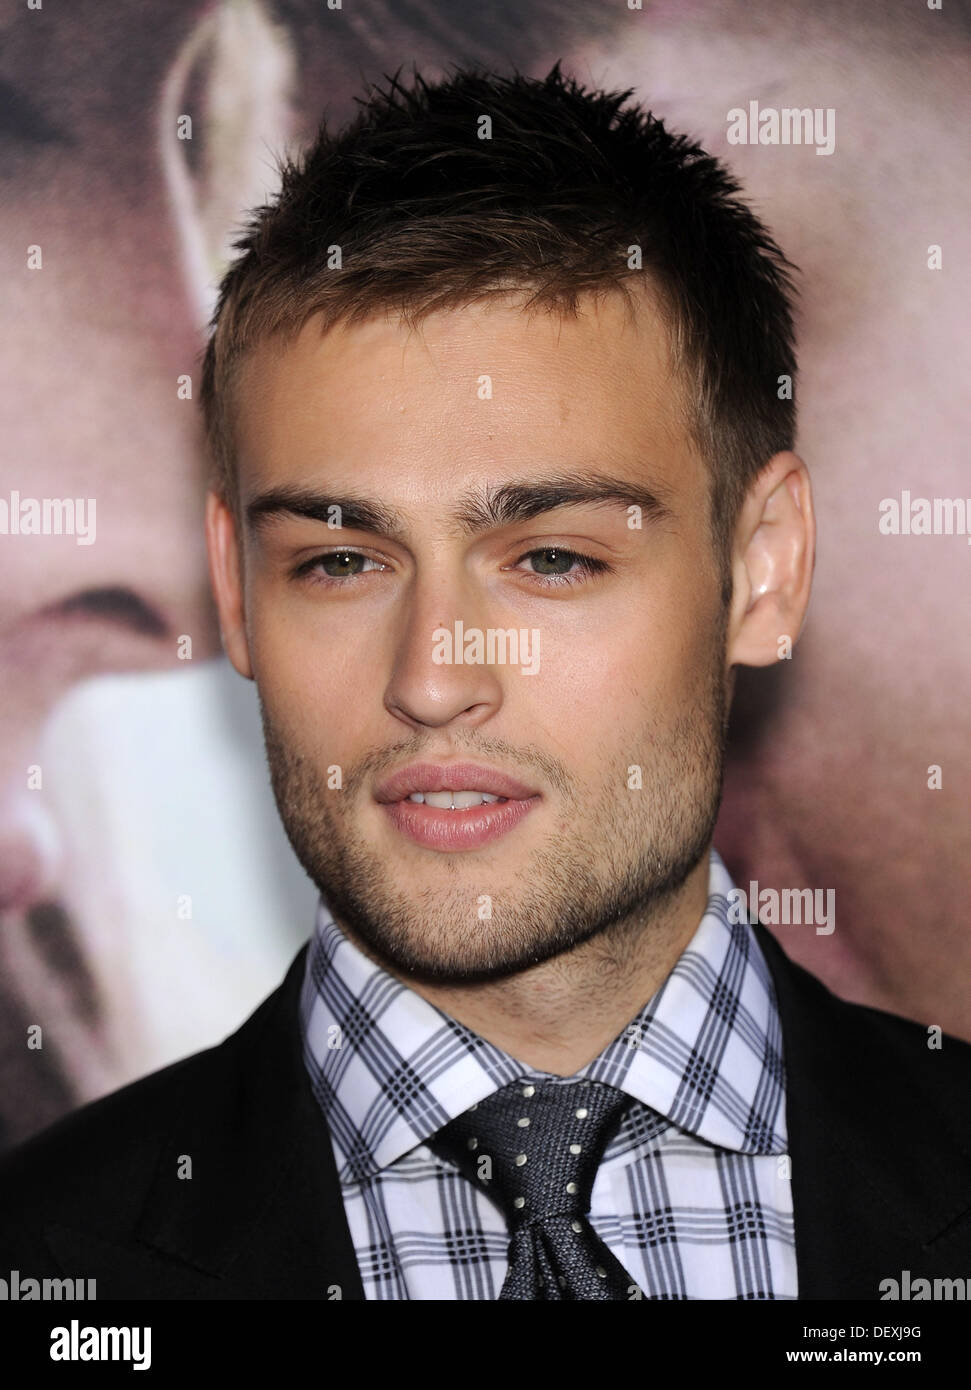 Hollywood, California, USA. 24th Sep, 2013. Douglas Booth arrives for the premiere of the film 'Romeo & Juliet' at the Arclight theater. © Lisa O'Connor/ZUMAPRESS.com/Alamy Live News Stock Photo